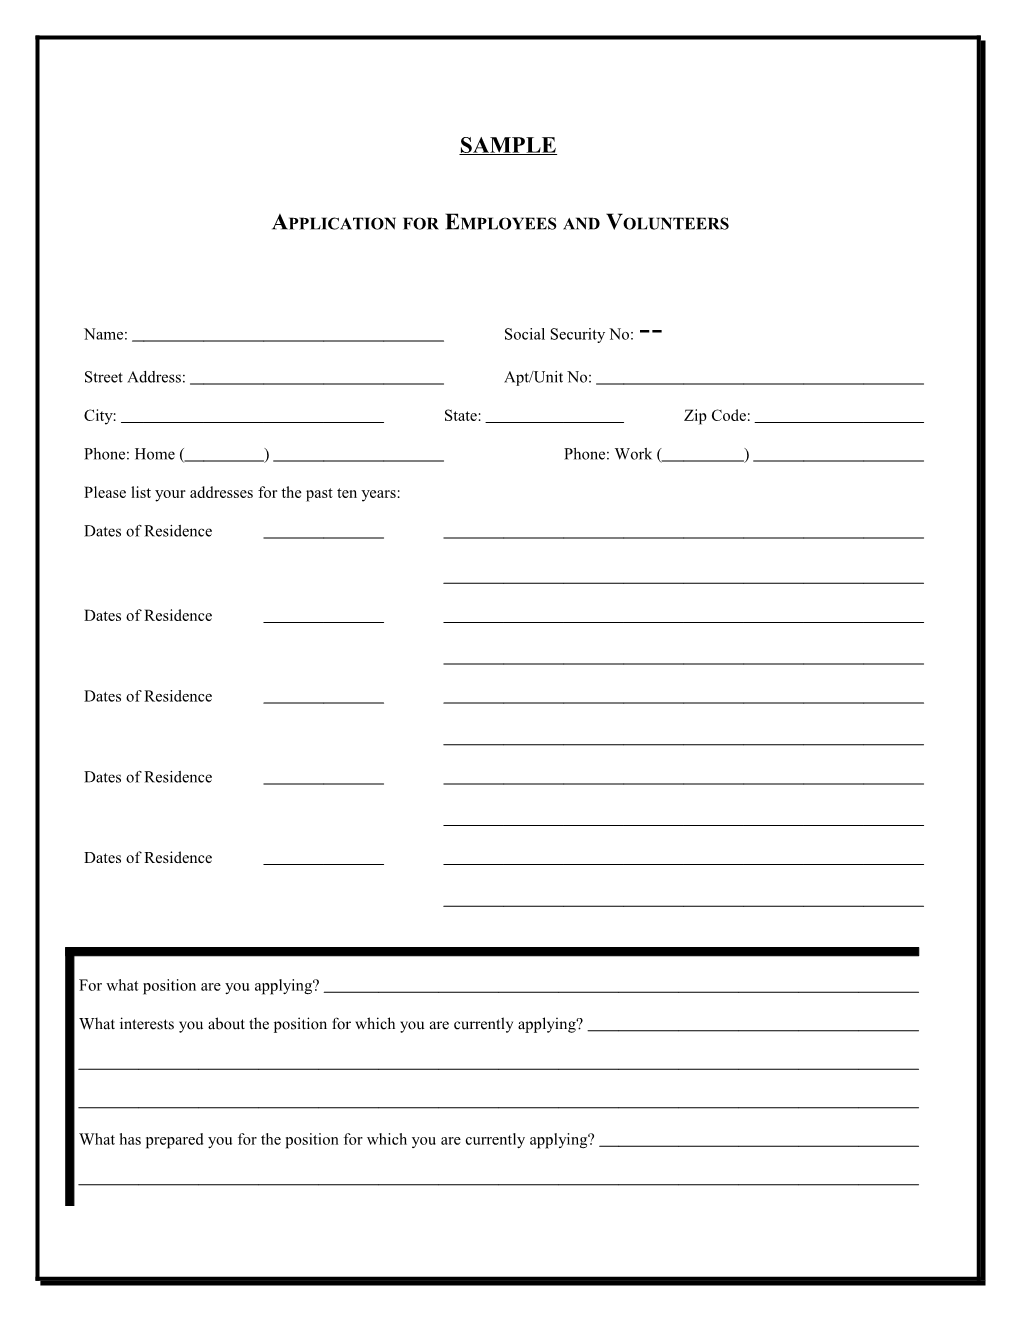 Application for Employees and Volunteers